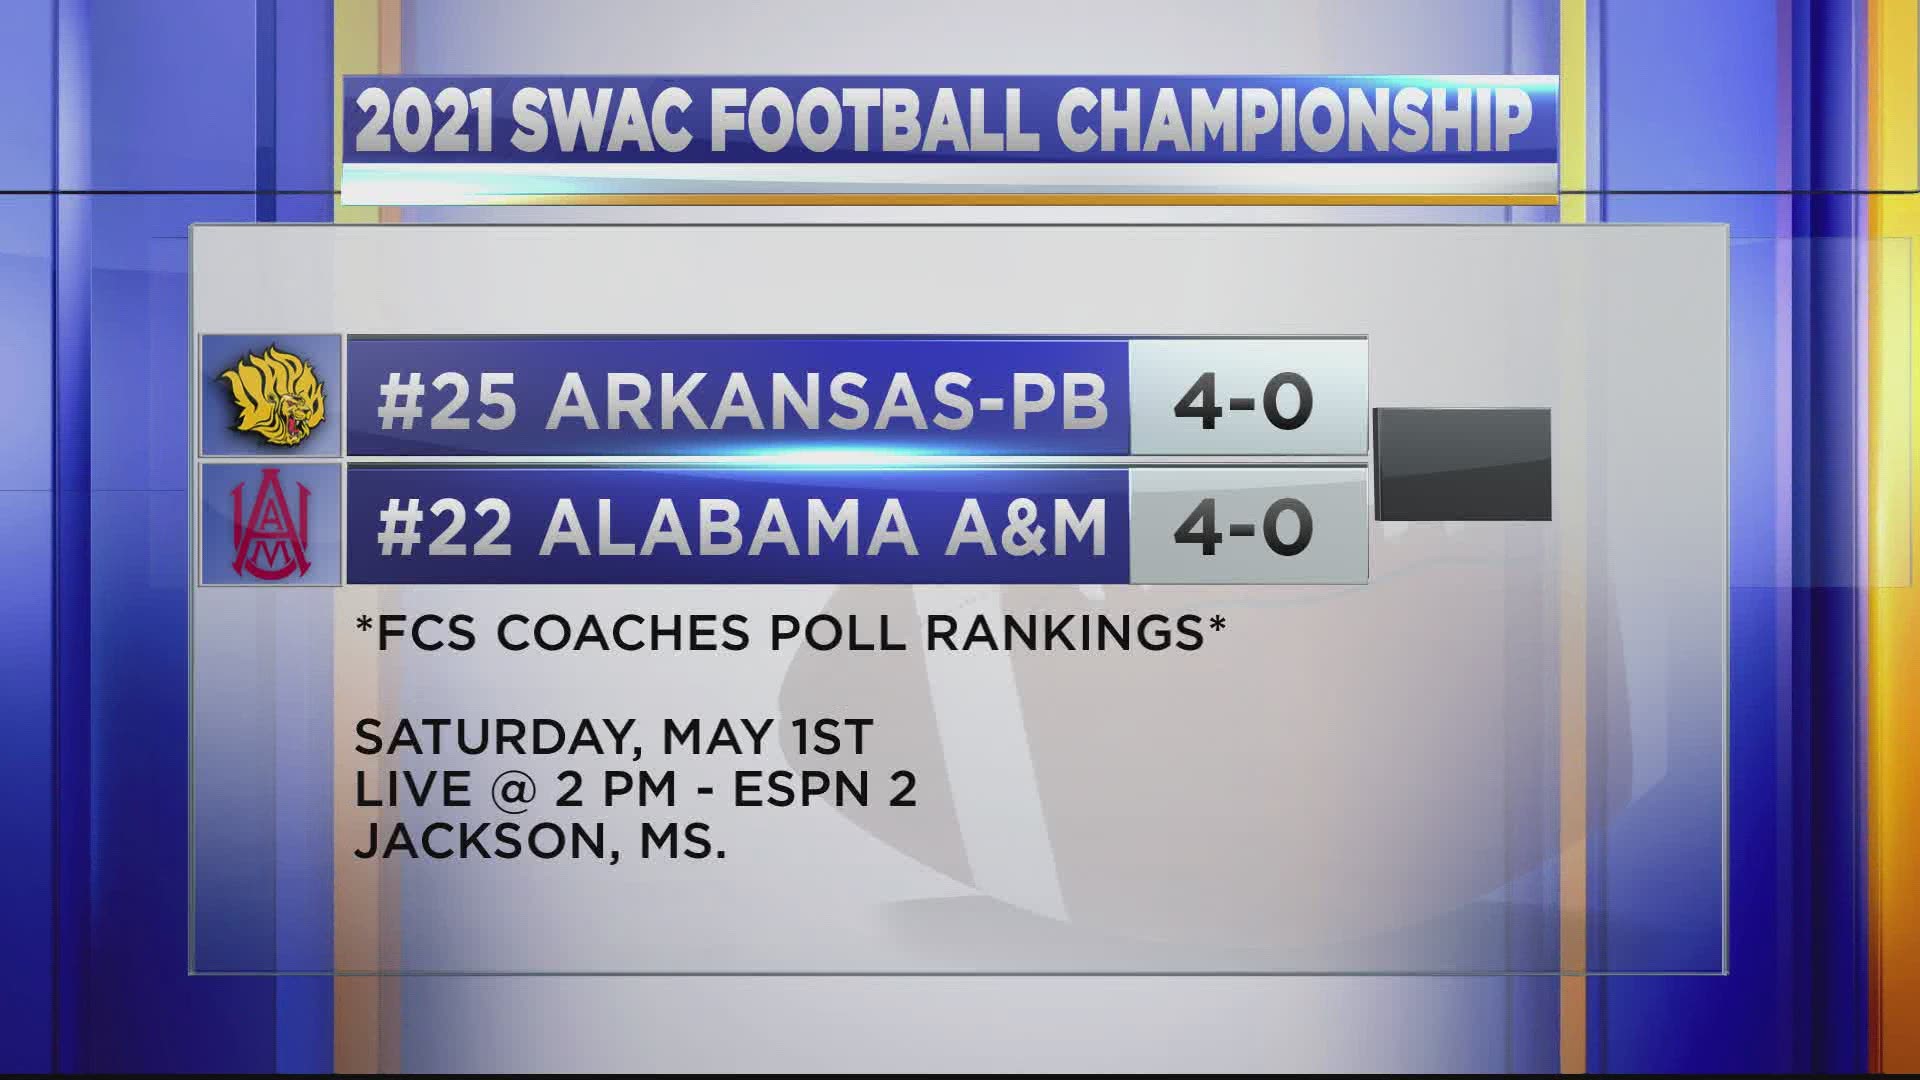 The 2021 Spring Football SWAC Championship between Alabama A&M and Arkansas-Pine Bluff will be played in Jackson, Mississippi.